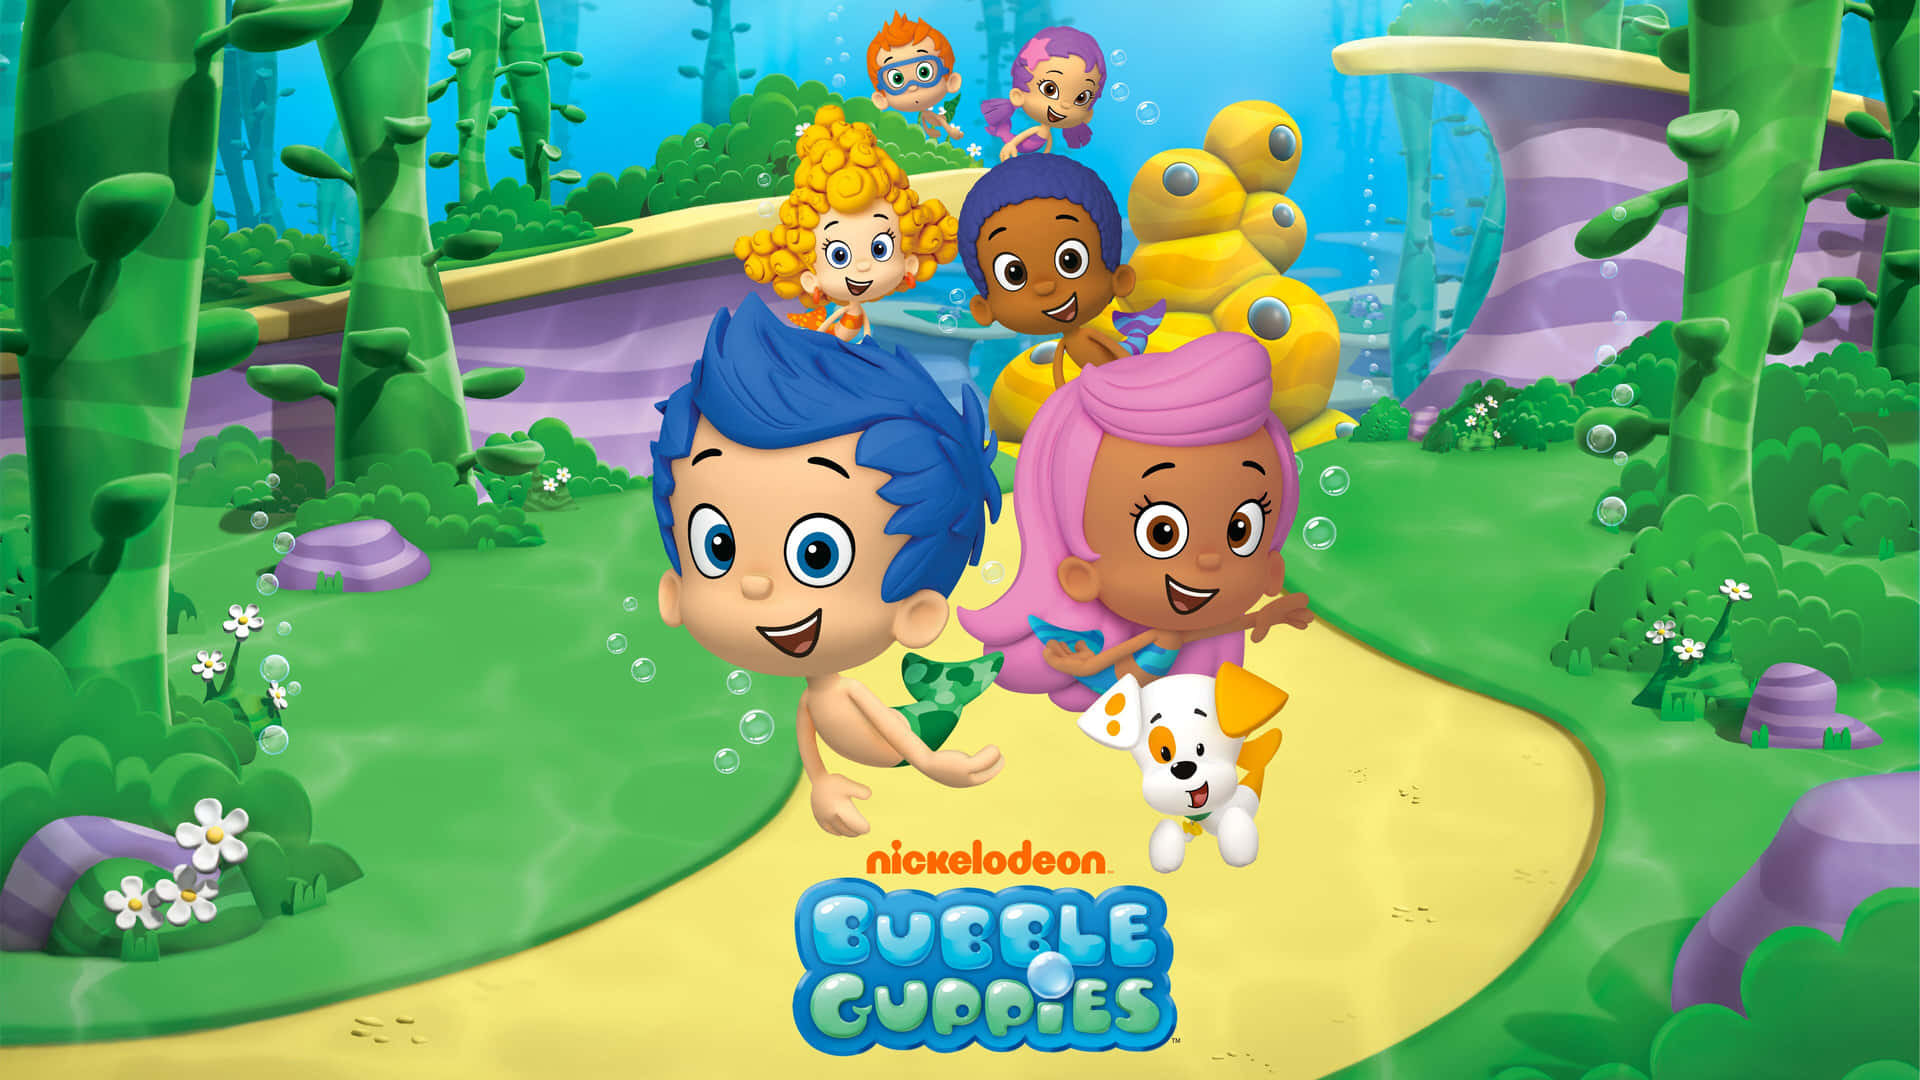 "Let's Have Fun with Bubble Guppies!"